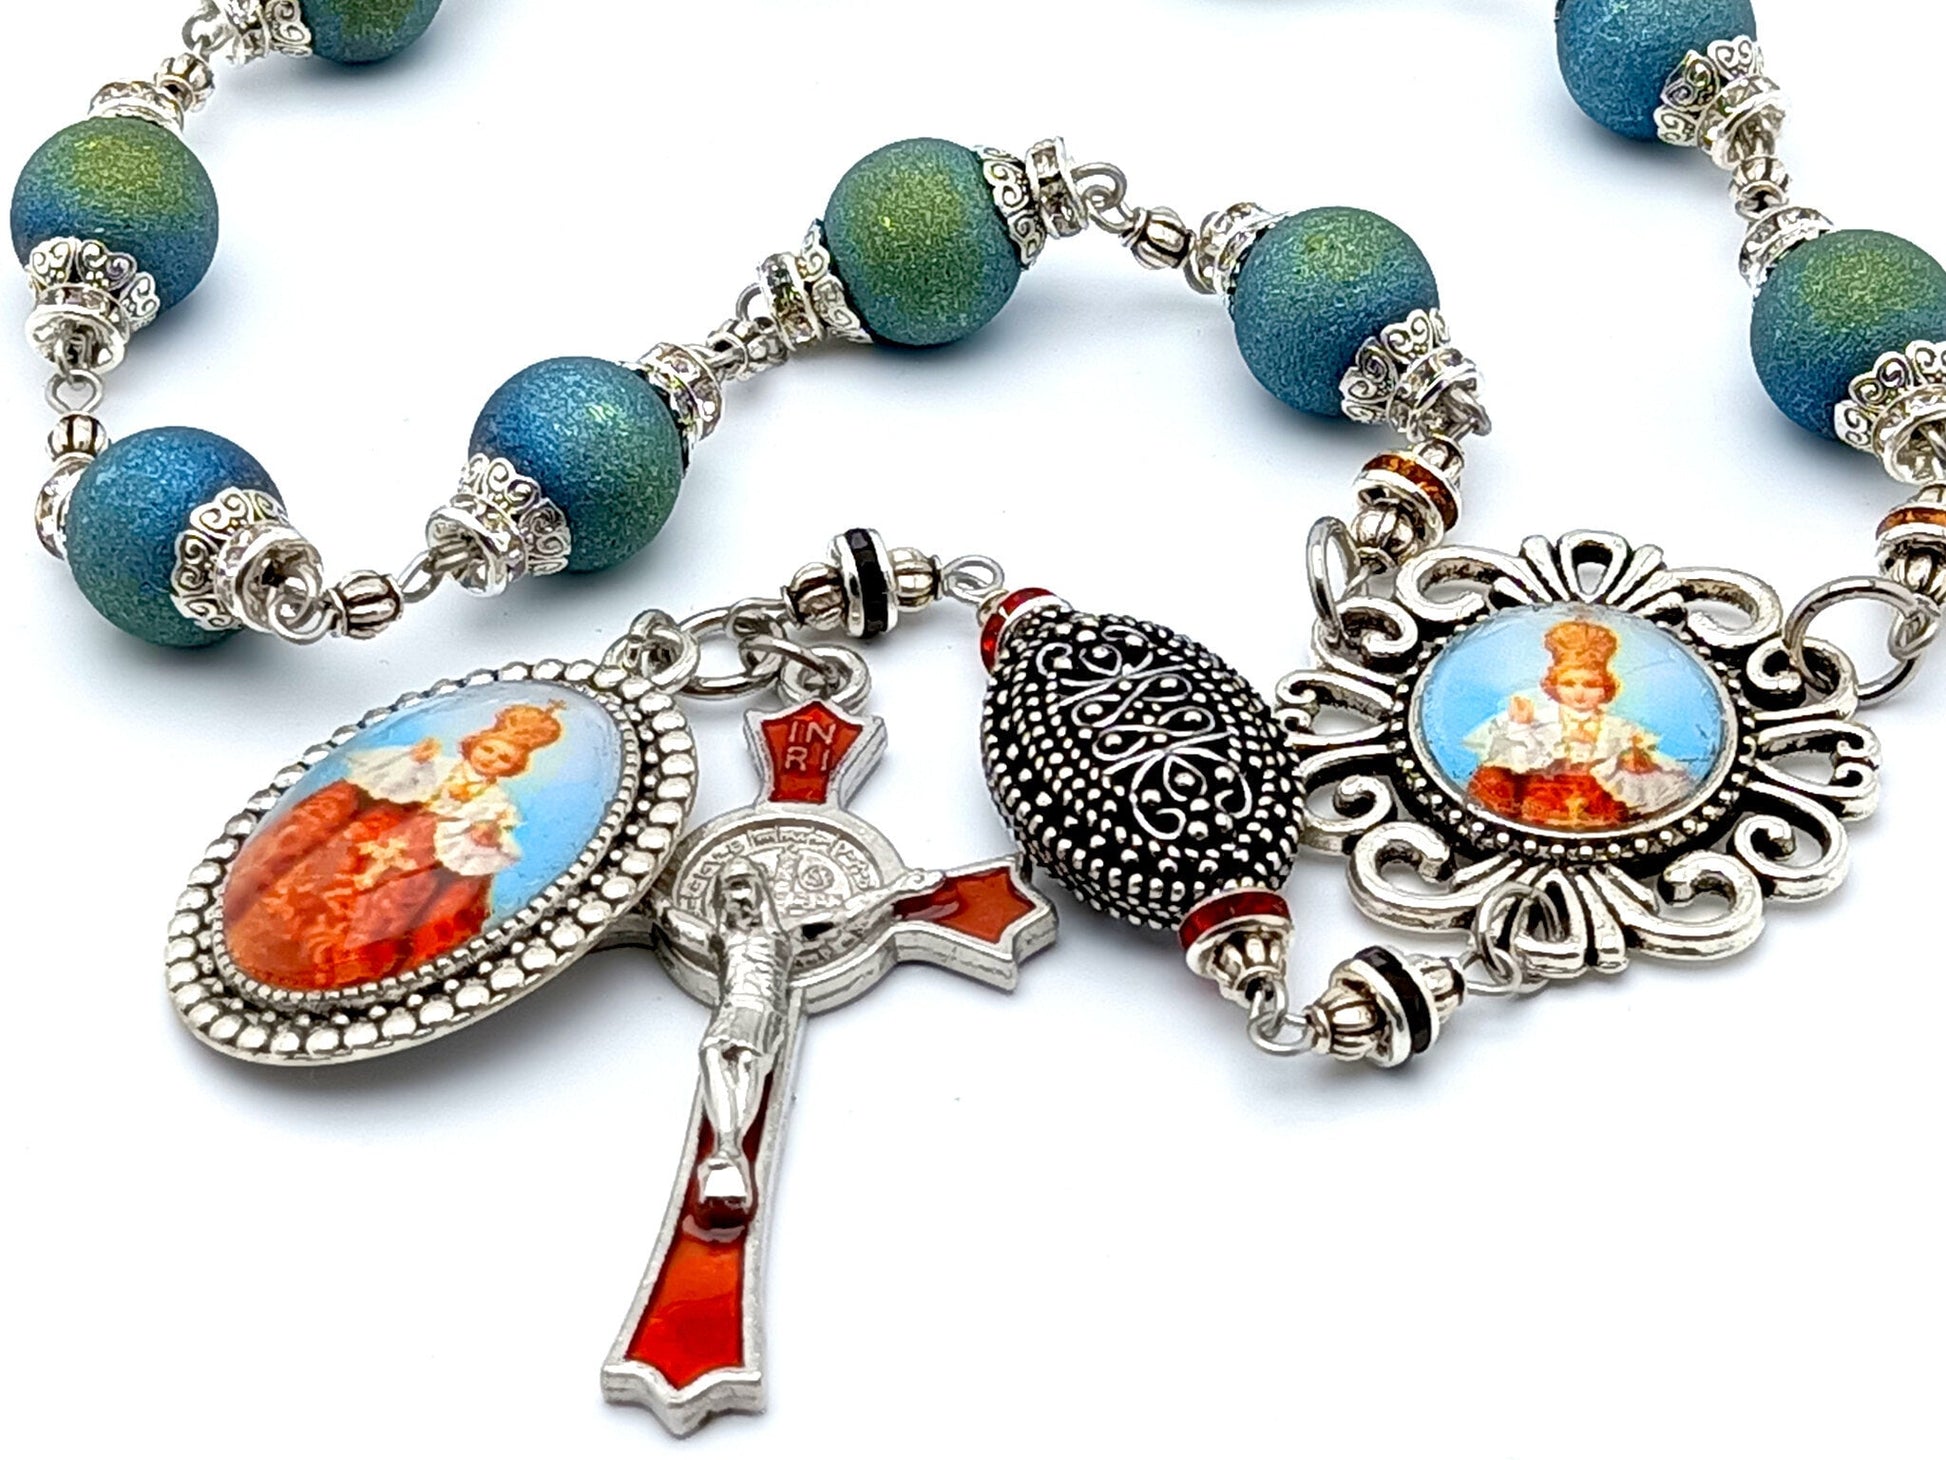 Infant of Prague unique rosary beads single decade rosary with blue green crystal beads, red enamel crucifix and picture centre medal.